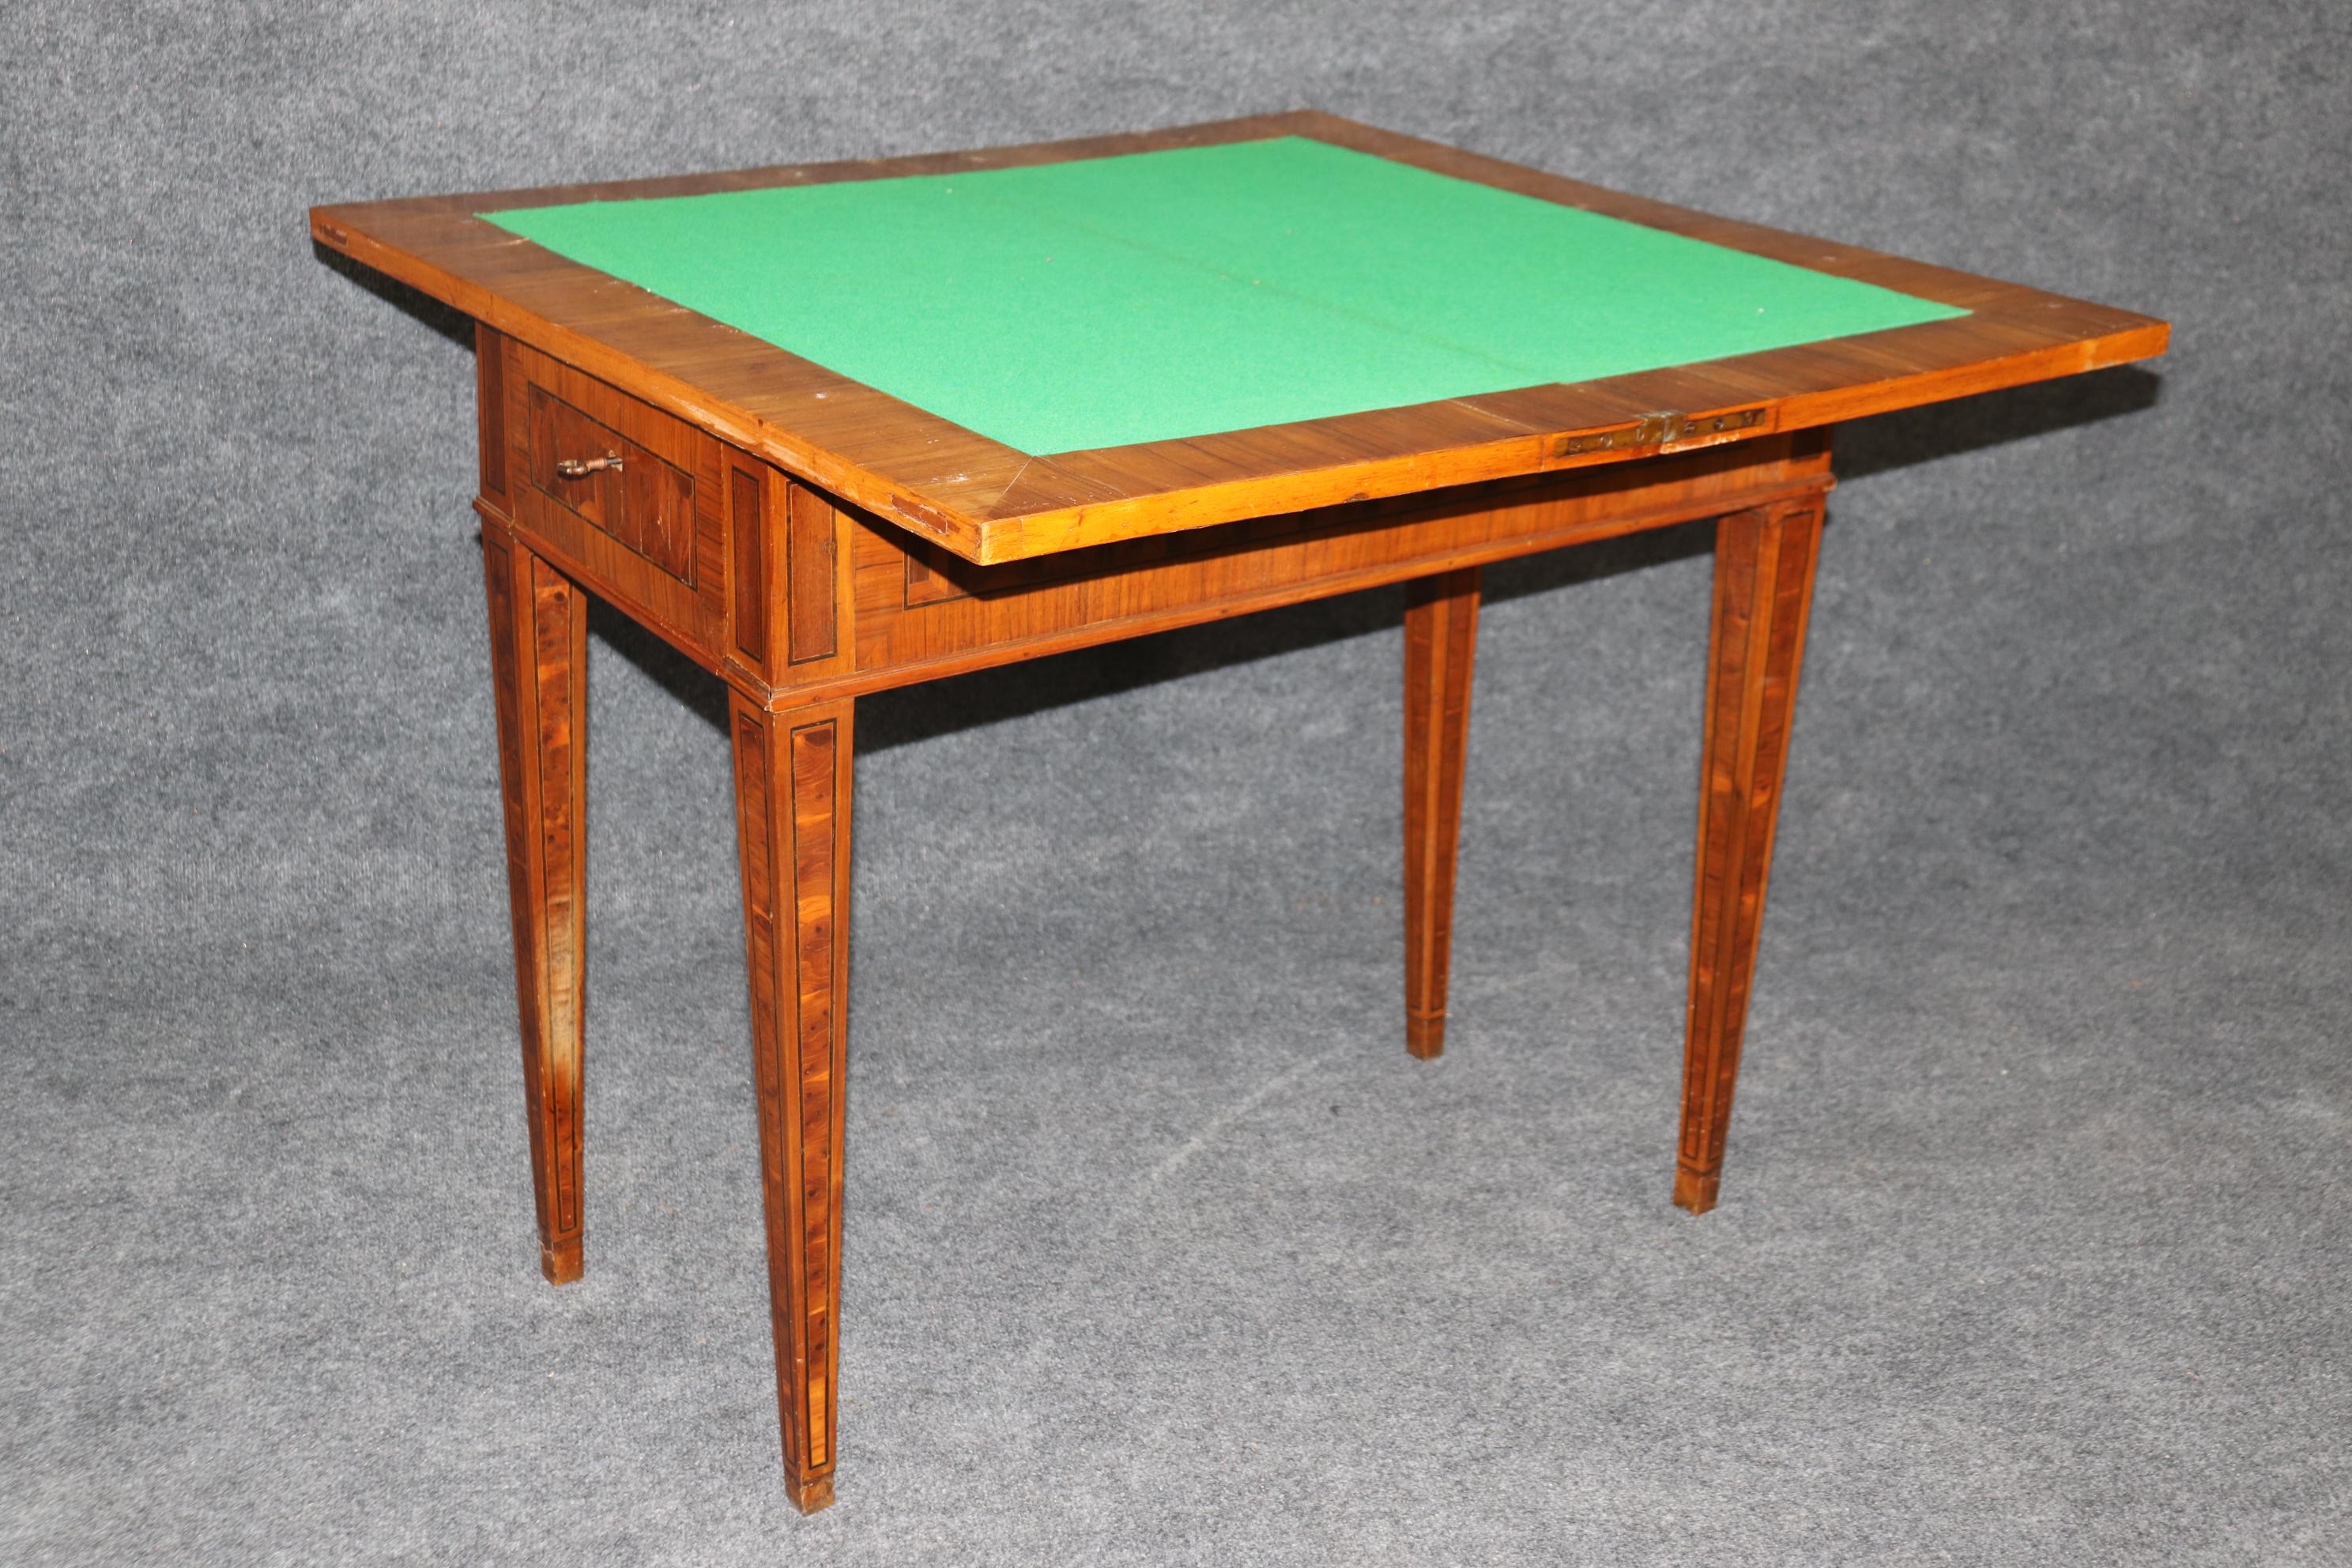 This is a rare and unique optical illusion inlaid rosewood and Olivewood games table with new felt. The table is a true work of art and has absolutely wonderful inlay and dark rosewood and lighter olivewood. The table dates to the 1780s era and is